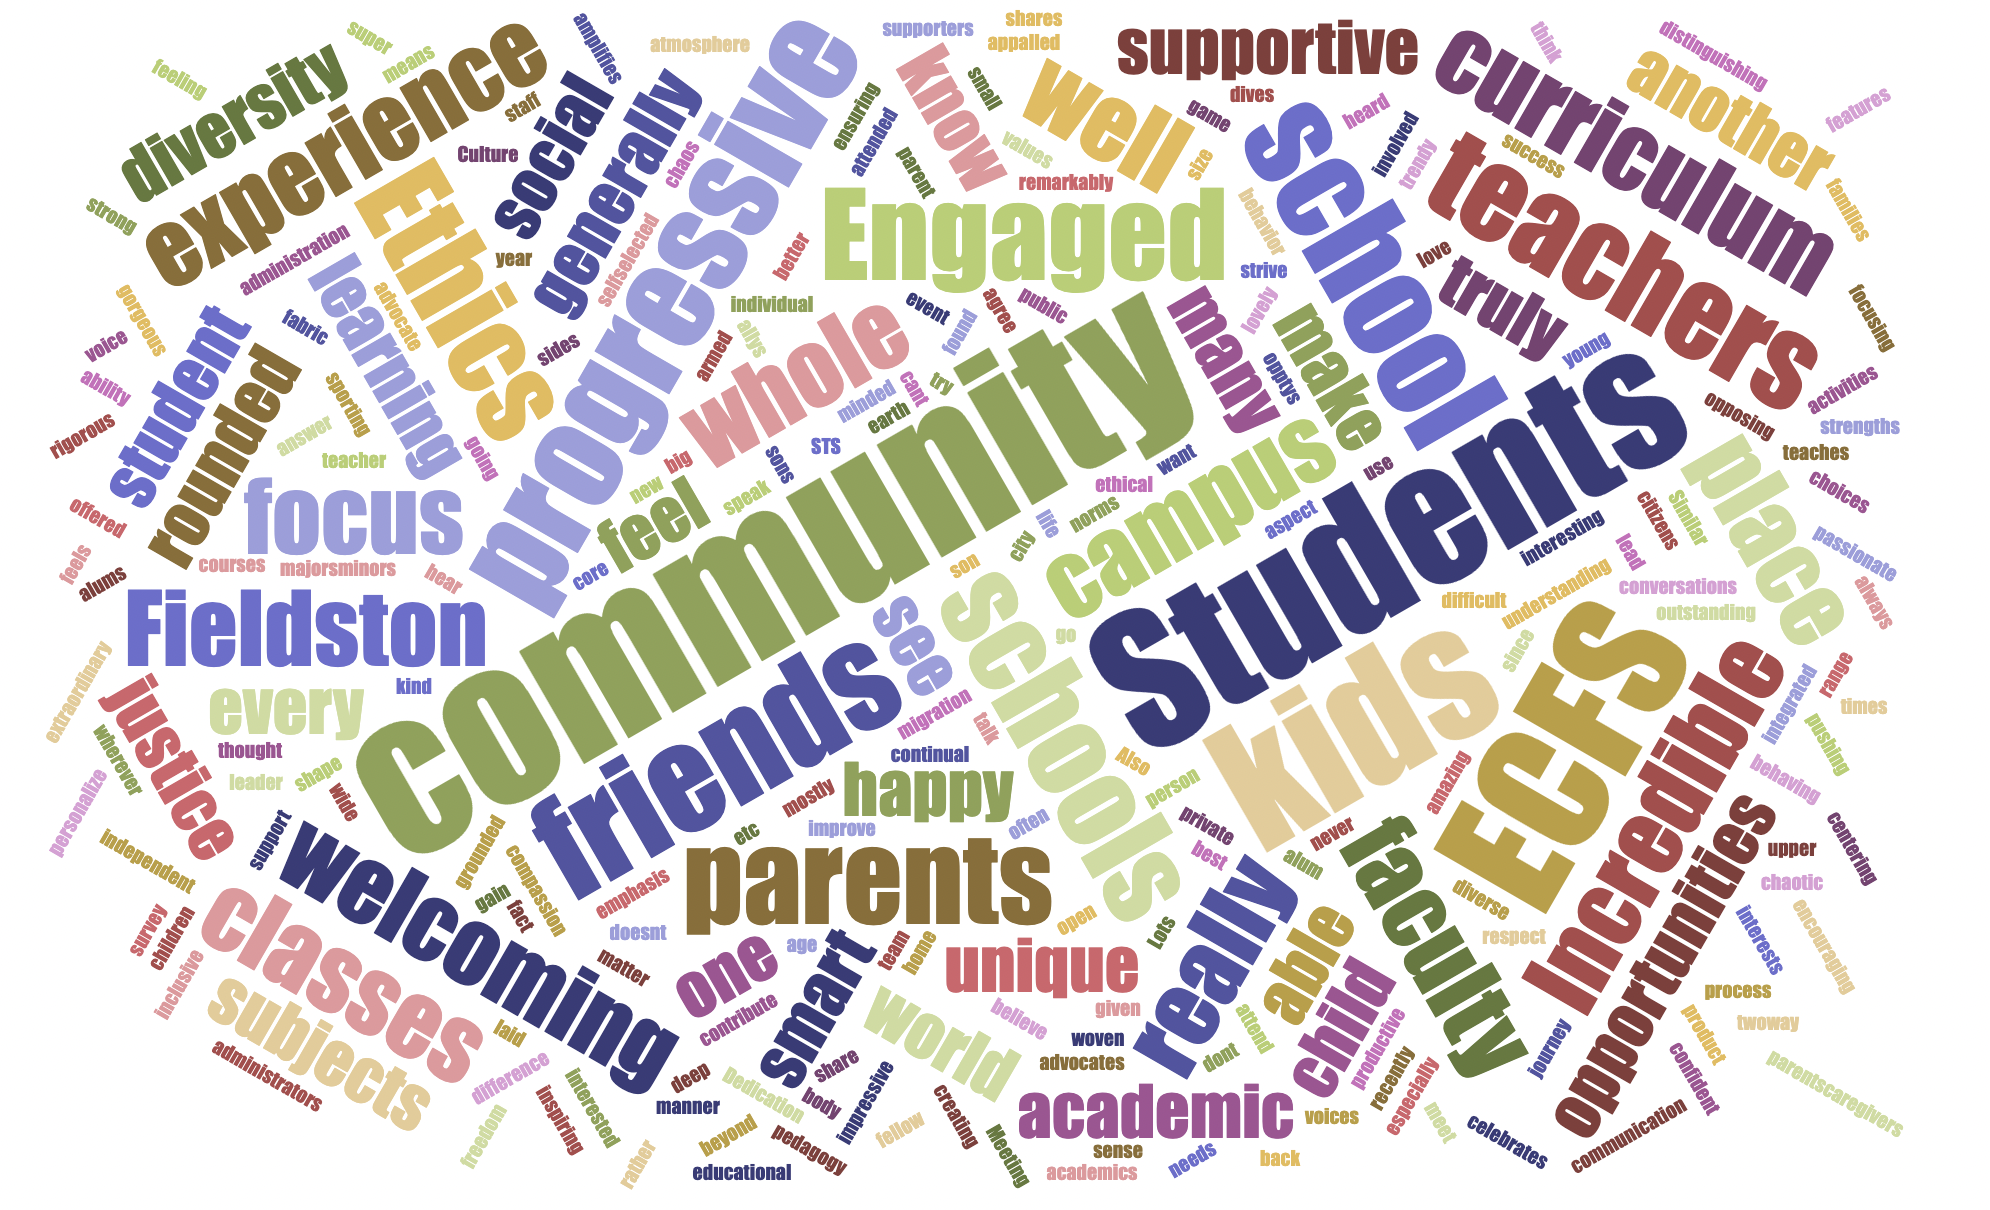 A word cloud showing words used to describe ECFS: Engaged, Community, Happy, Welcoming